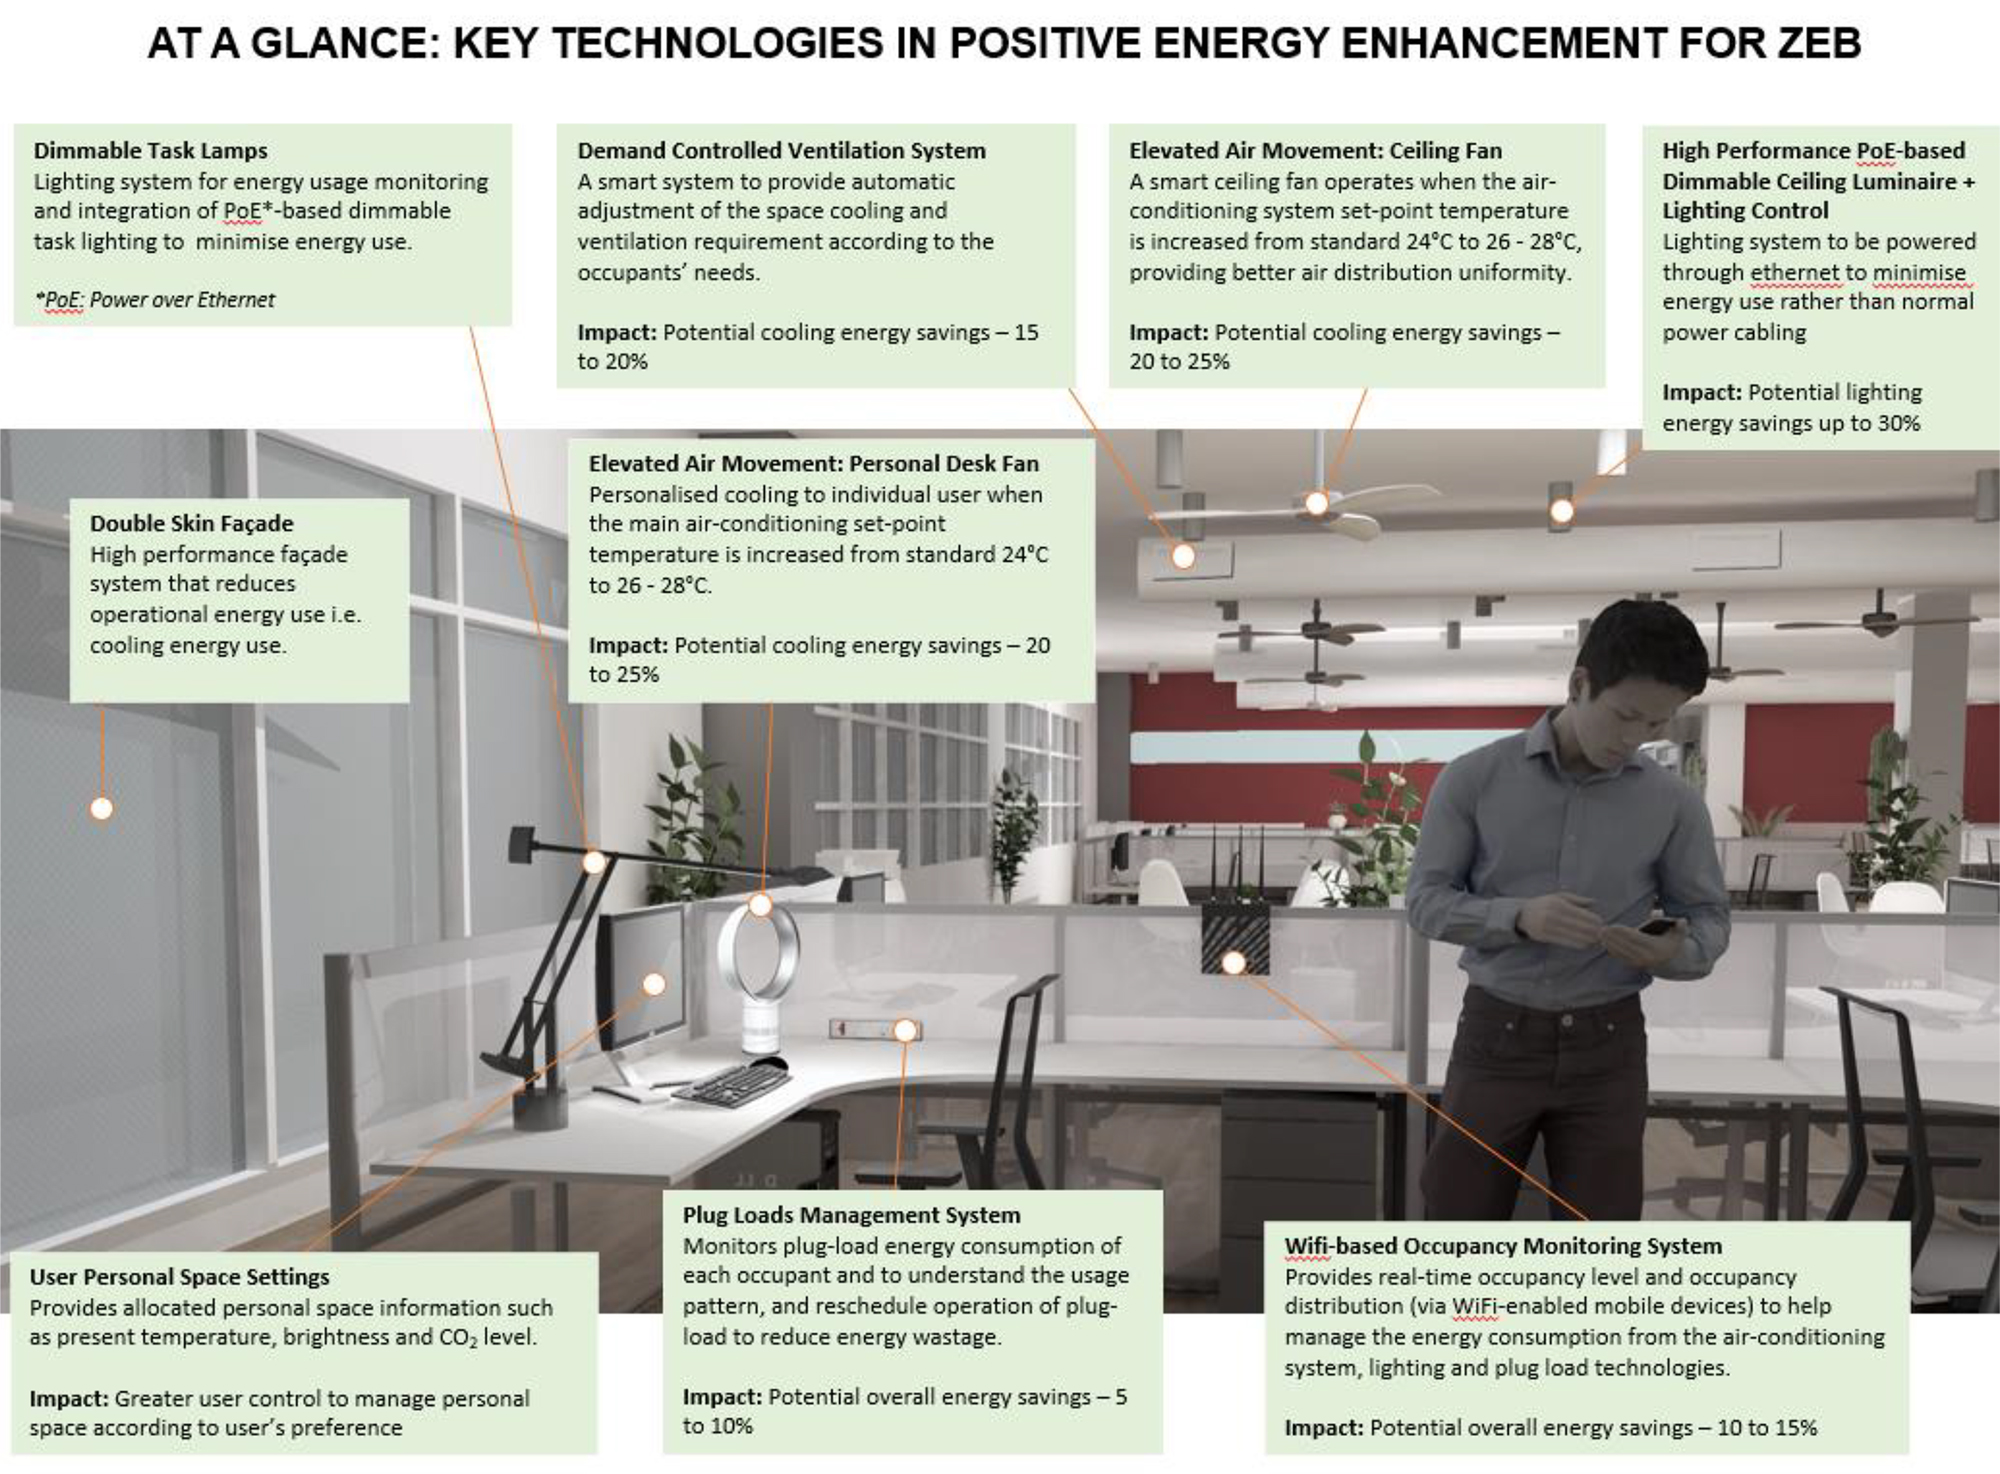 at a glance: key technologies in positive energy enhancement for zeb